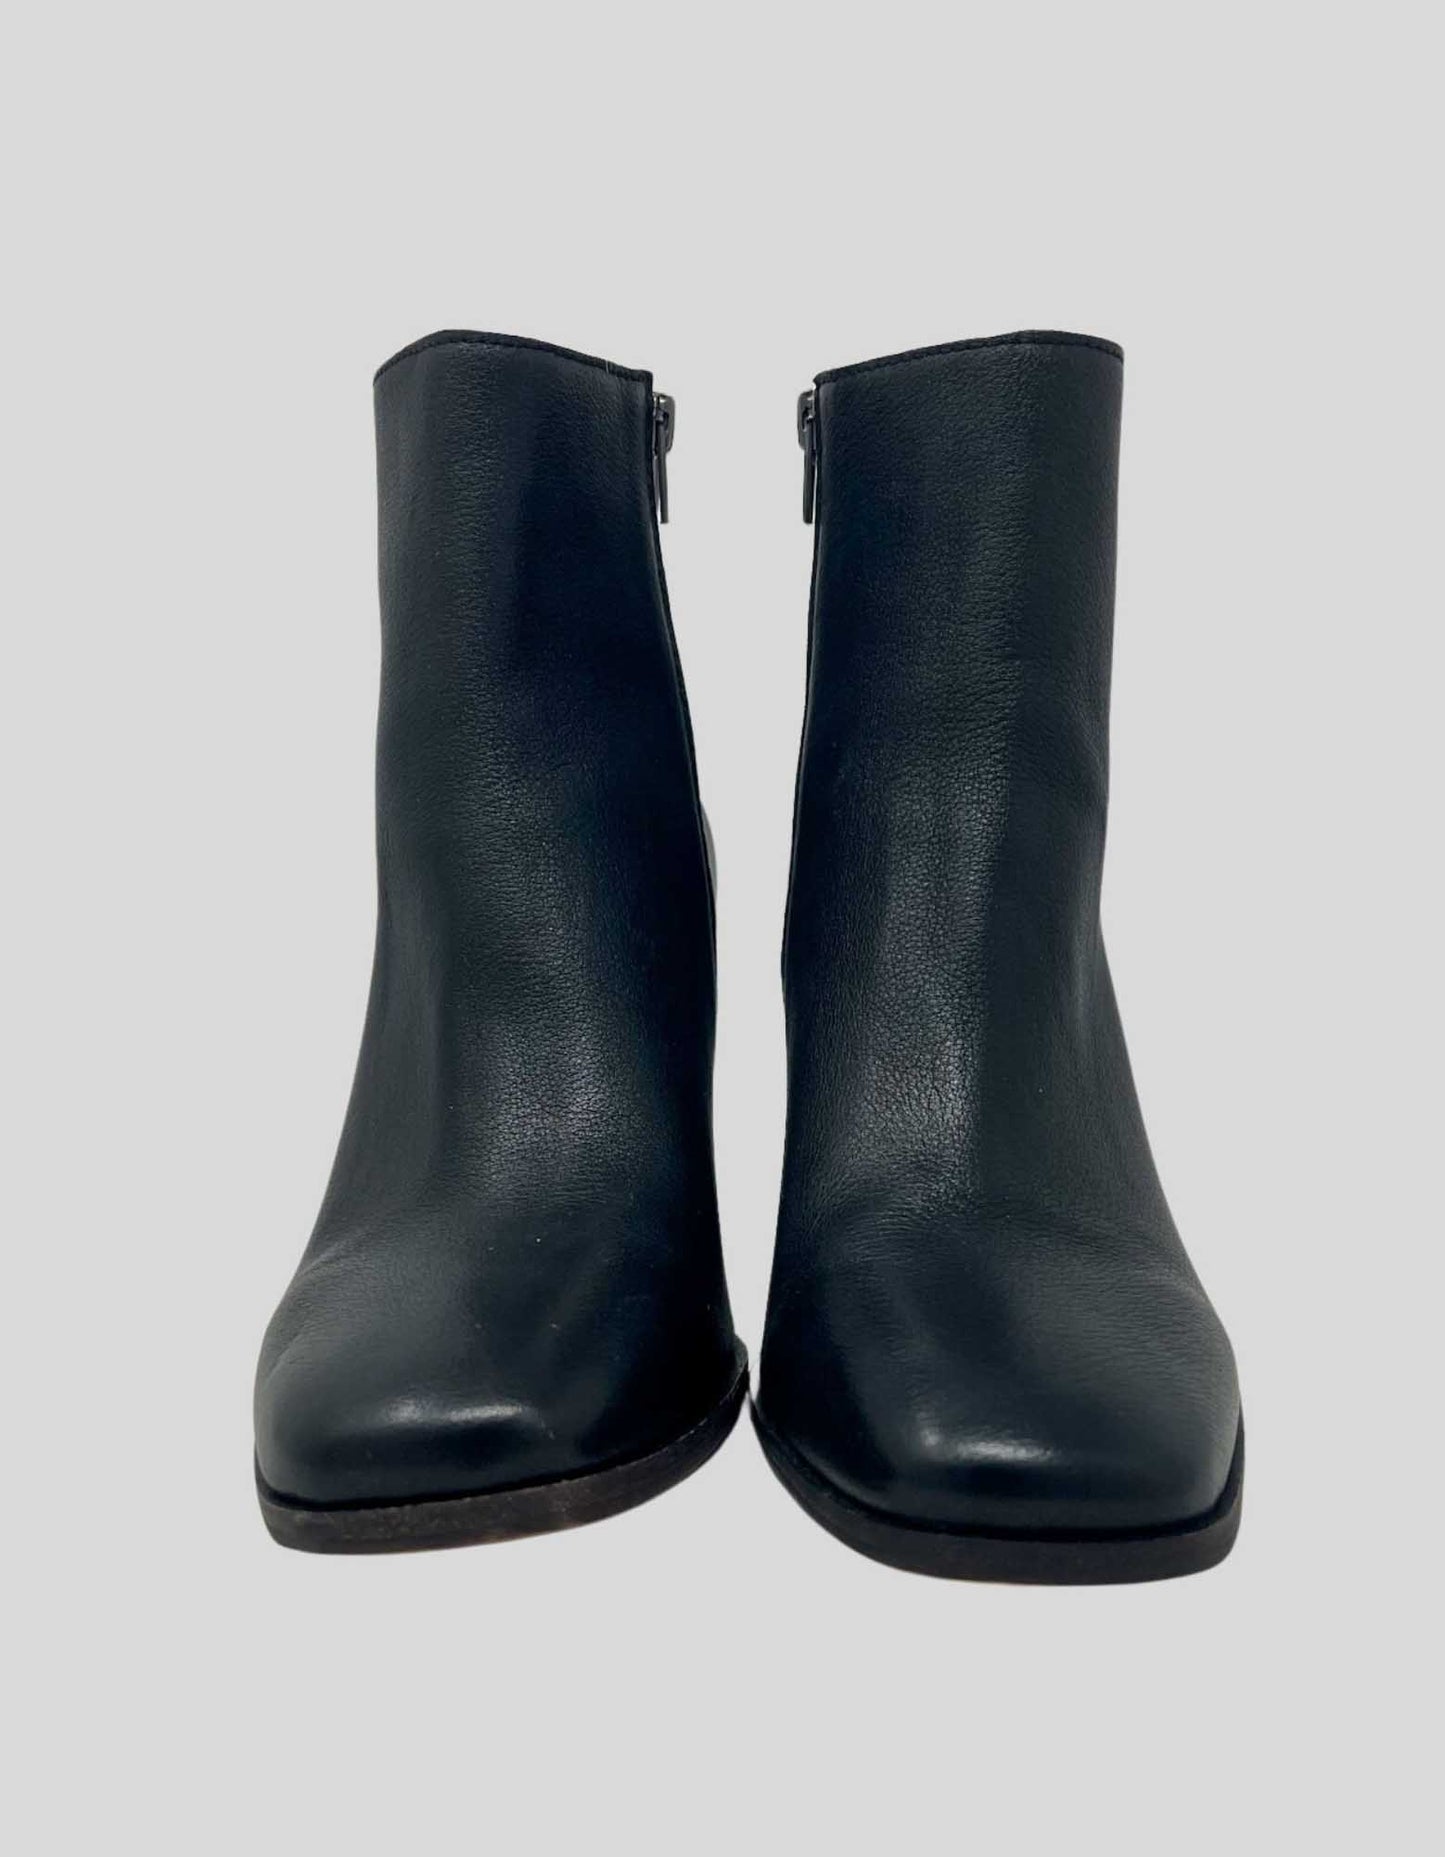 MADEWELL The Essex Ankle Boot - 9 US